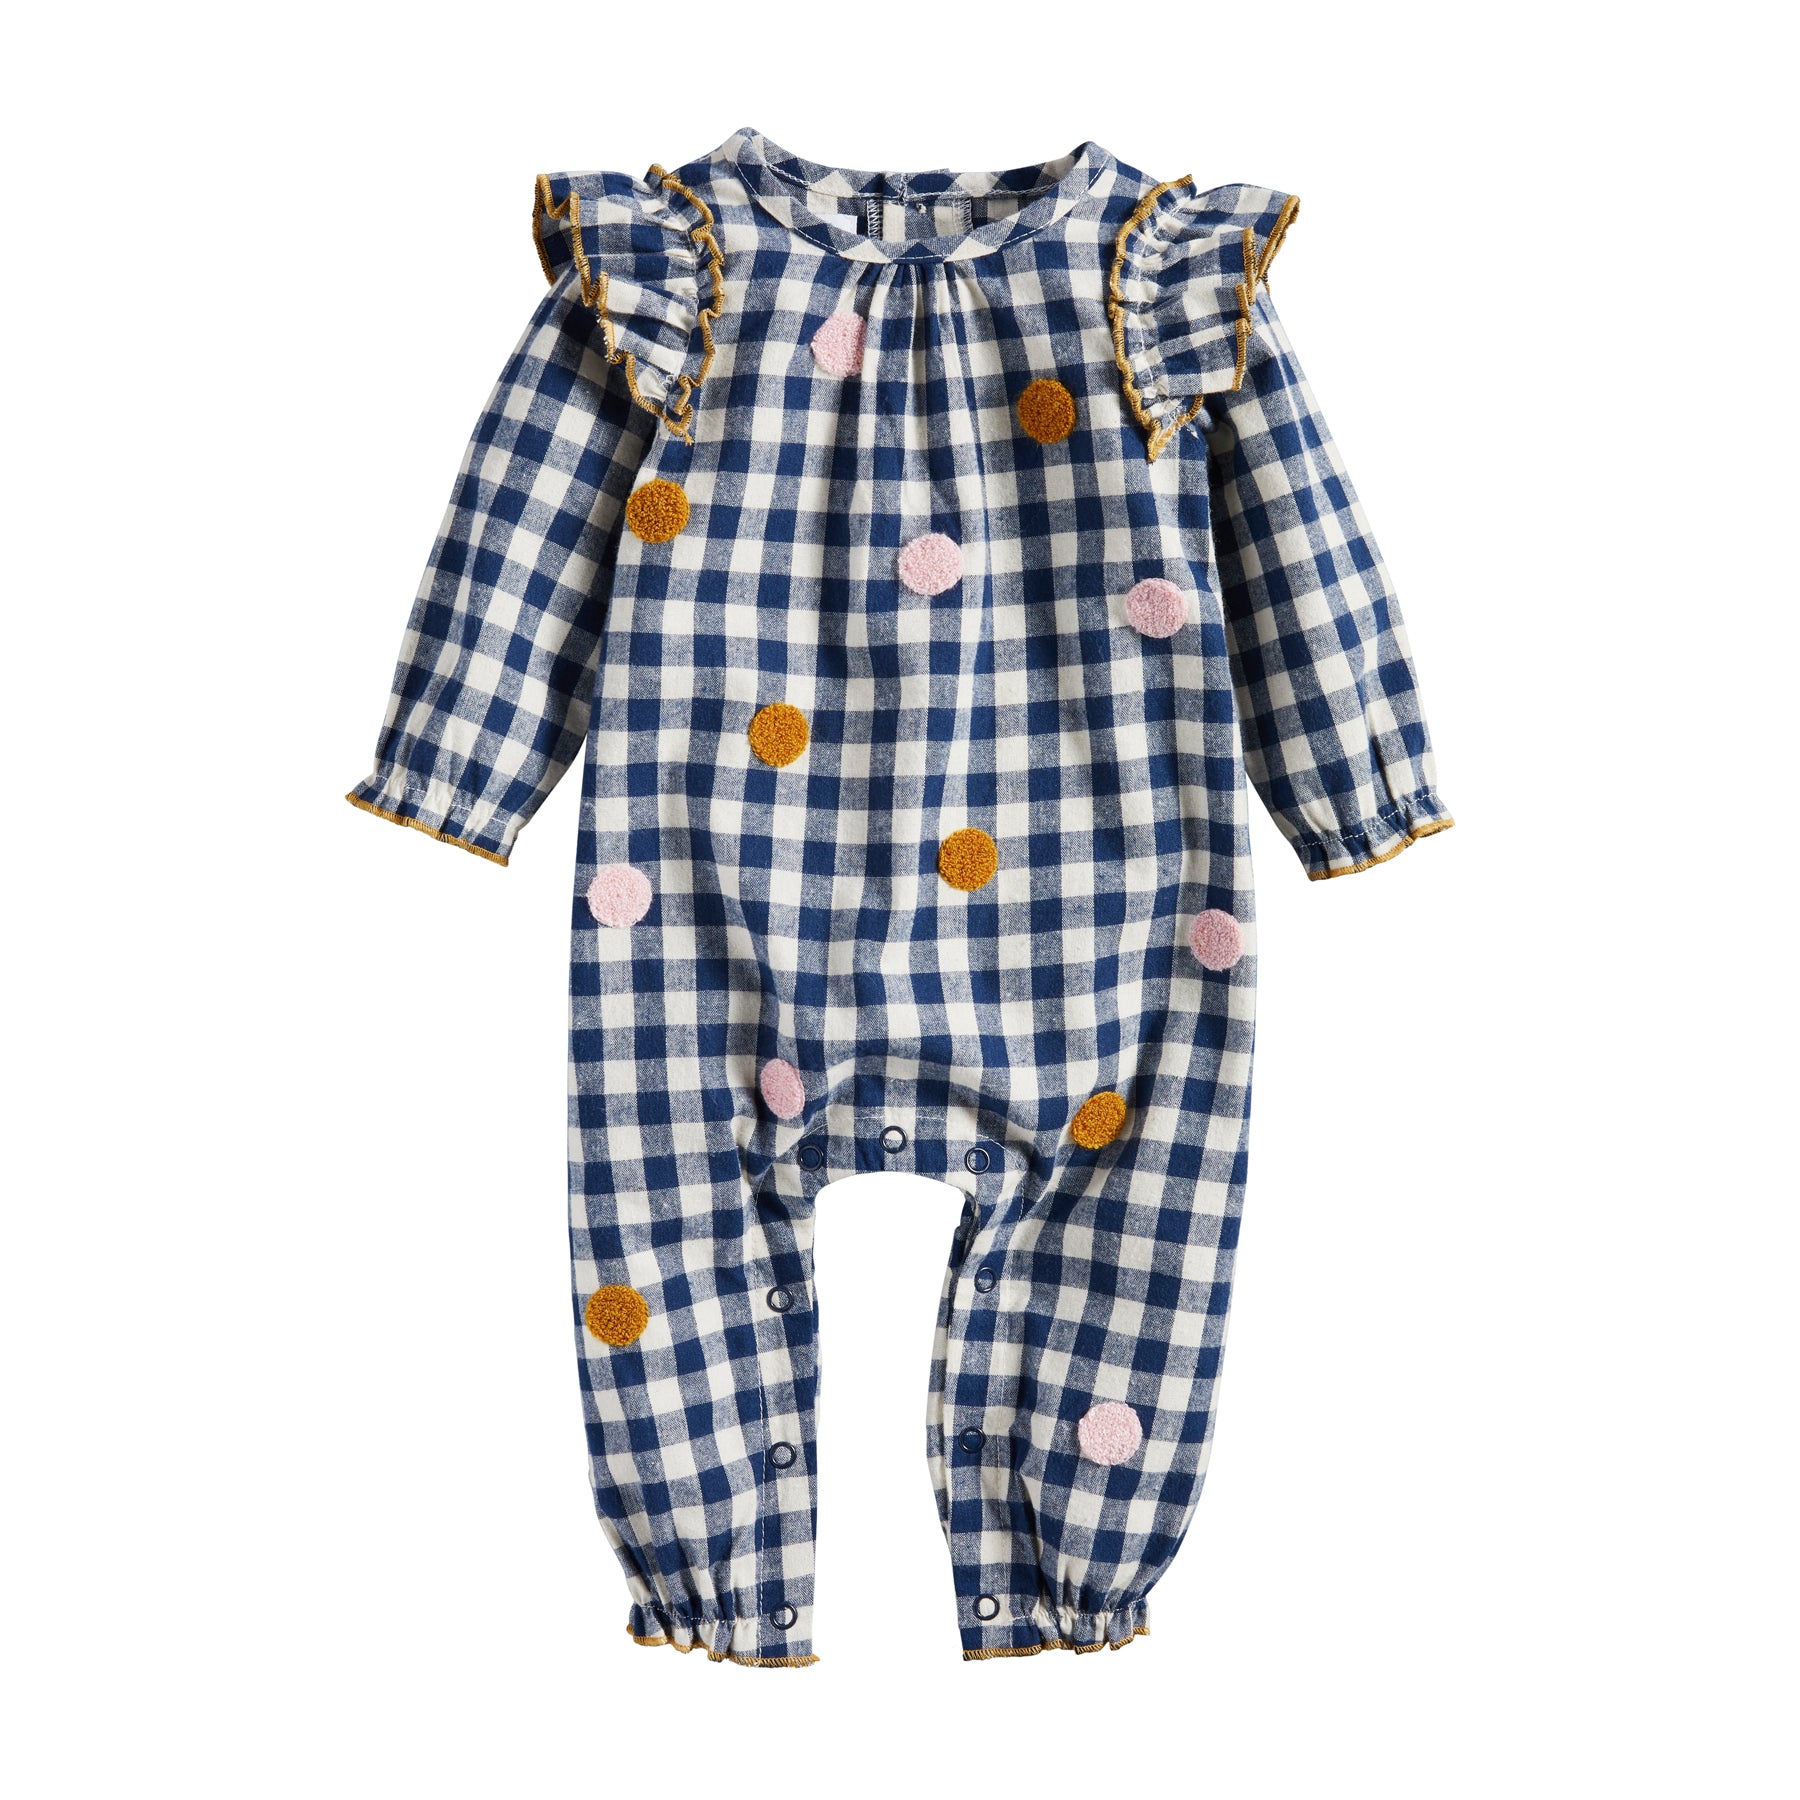 Mudpie Check Embroidered One-Piece